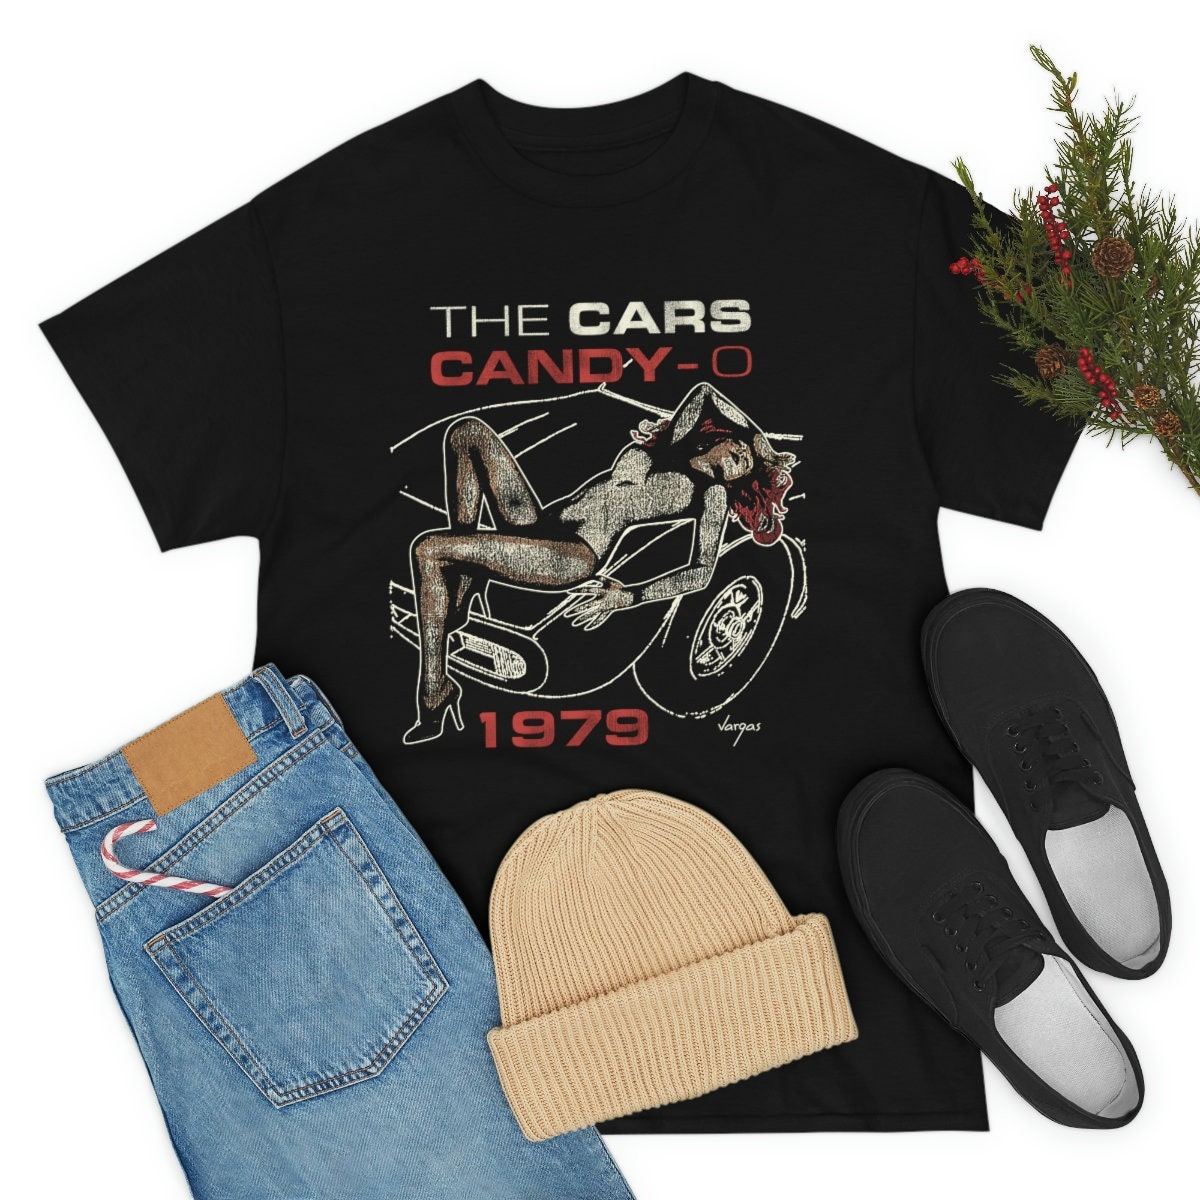 Discover THE CARS Eye Shirt, Candy O 1979, Vintage The Cars Candy O Rock Band Shirt